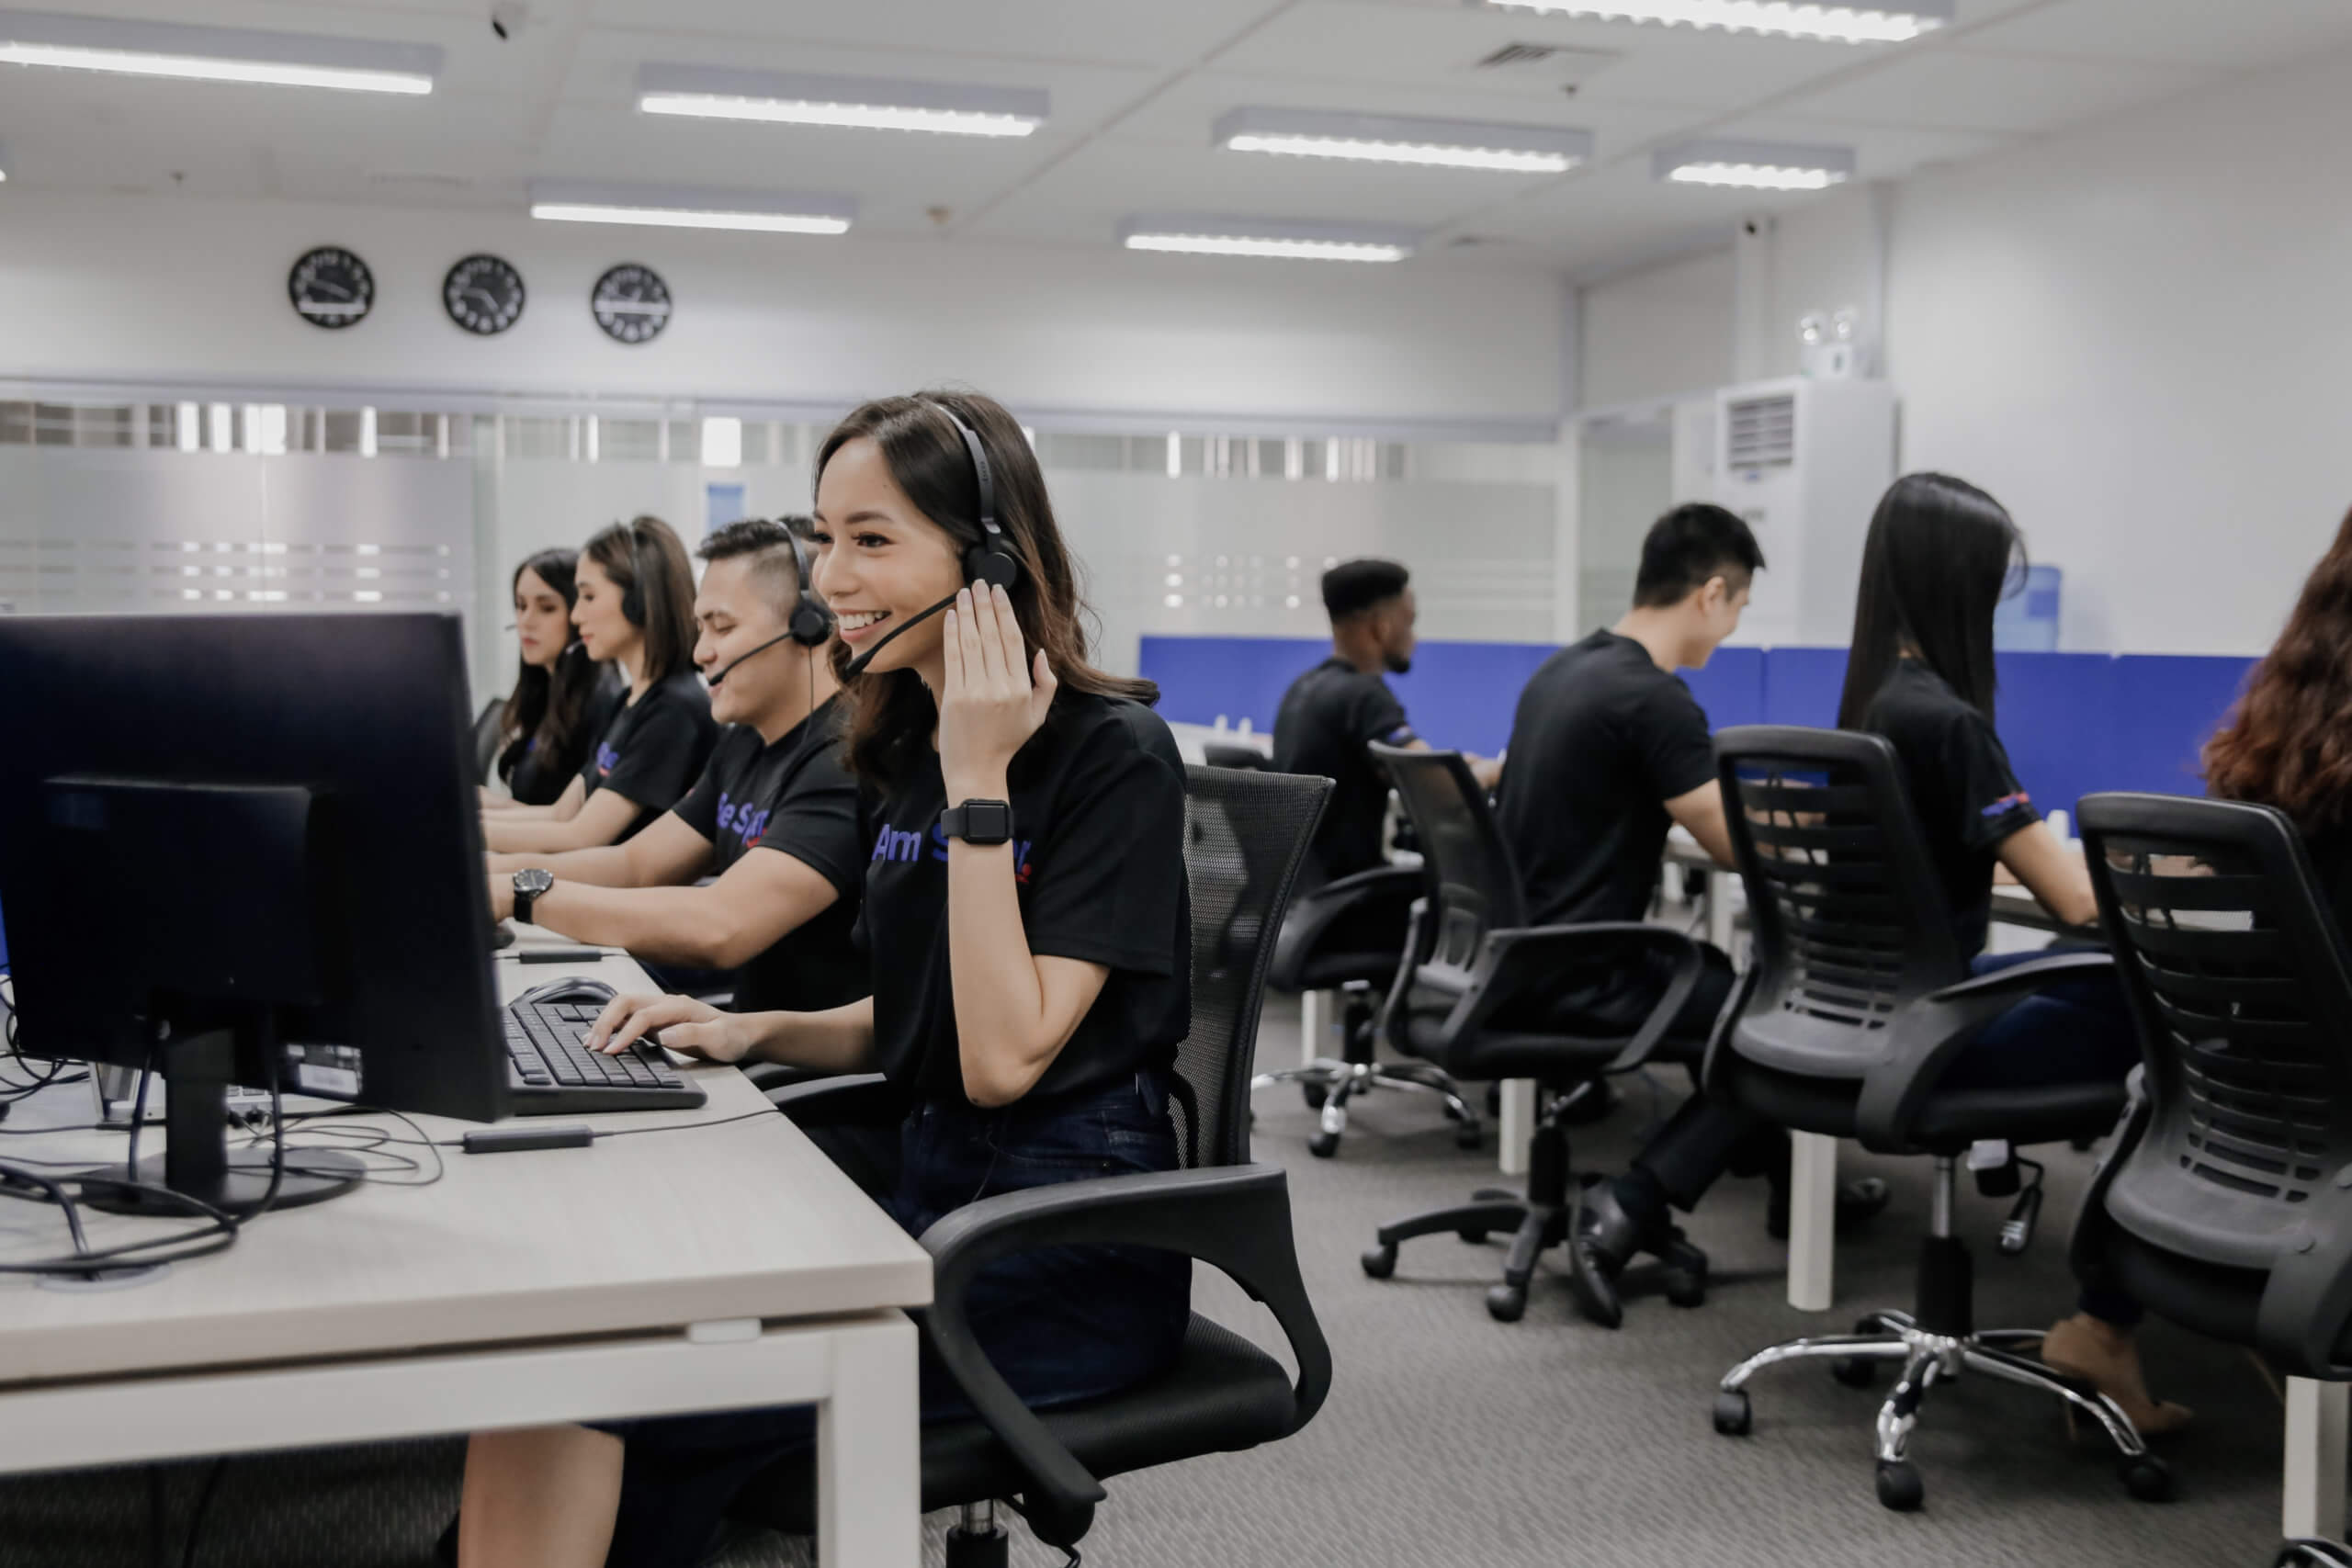 SuperStaff call center agents enjoy working as talks of modern dating trends dominating the office.